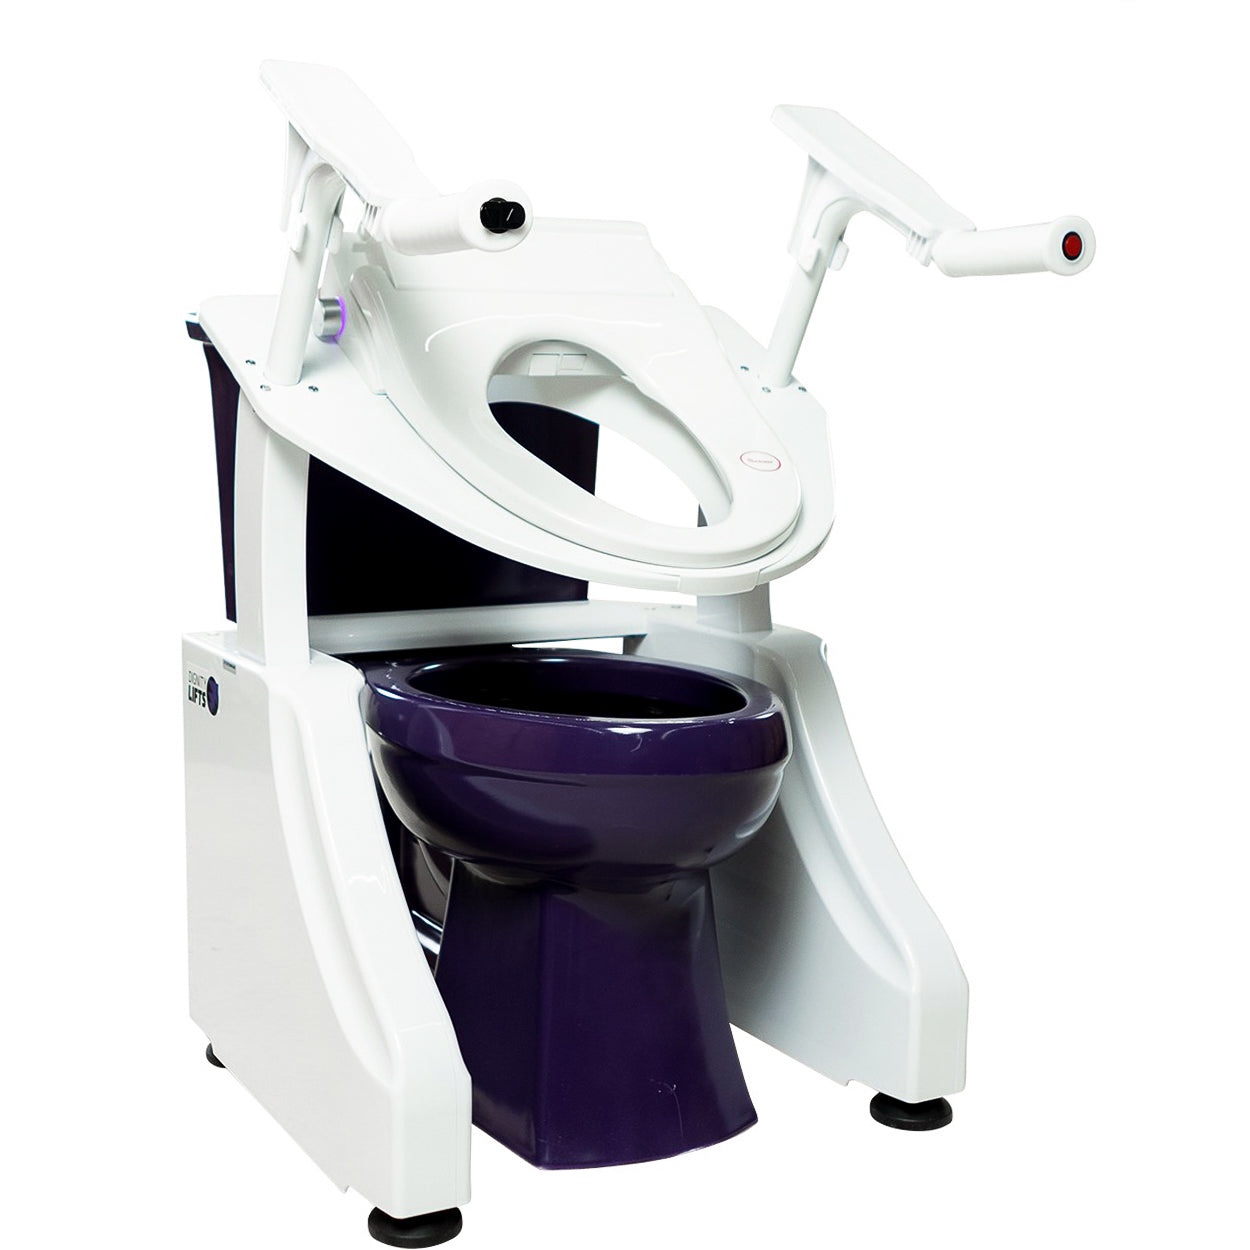 Image of Dignity Lifts - Bidet Toilet Lift - WL1 - In Stock, Ships Now